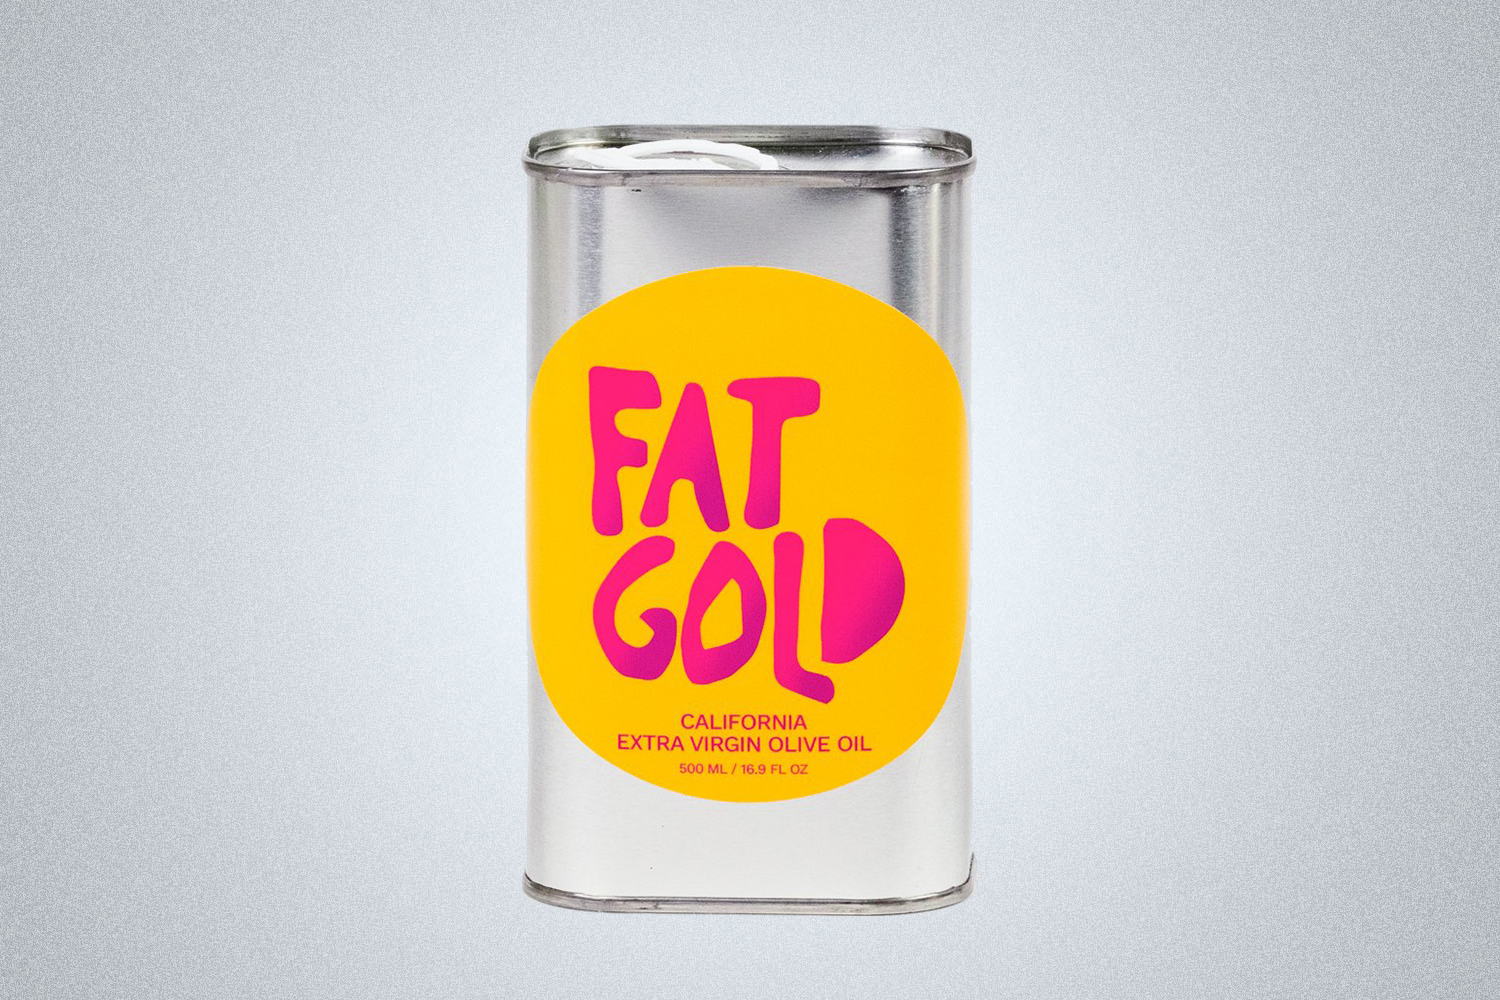 Can of Fat Gold Olive Oil